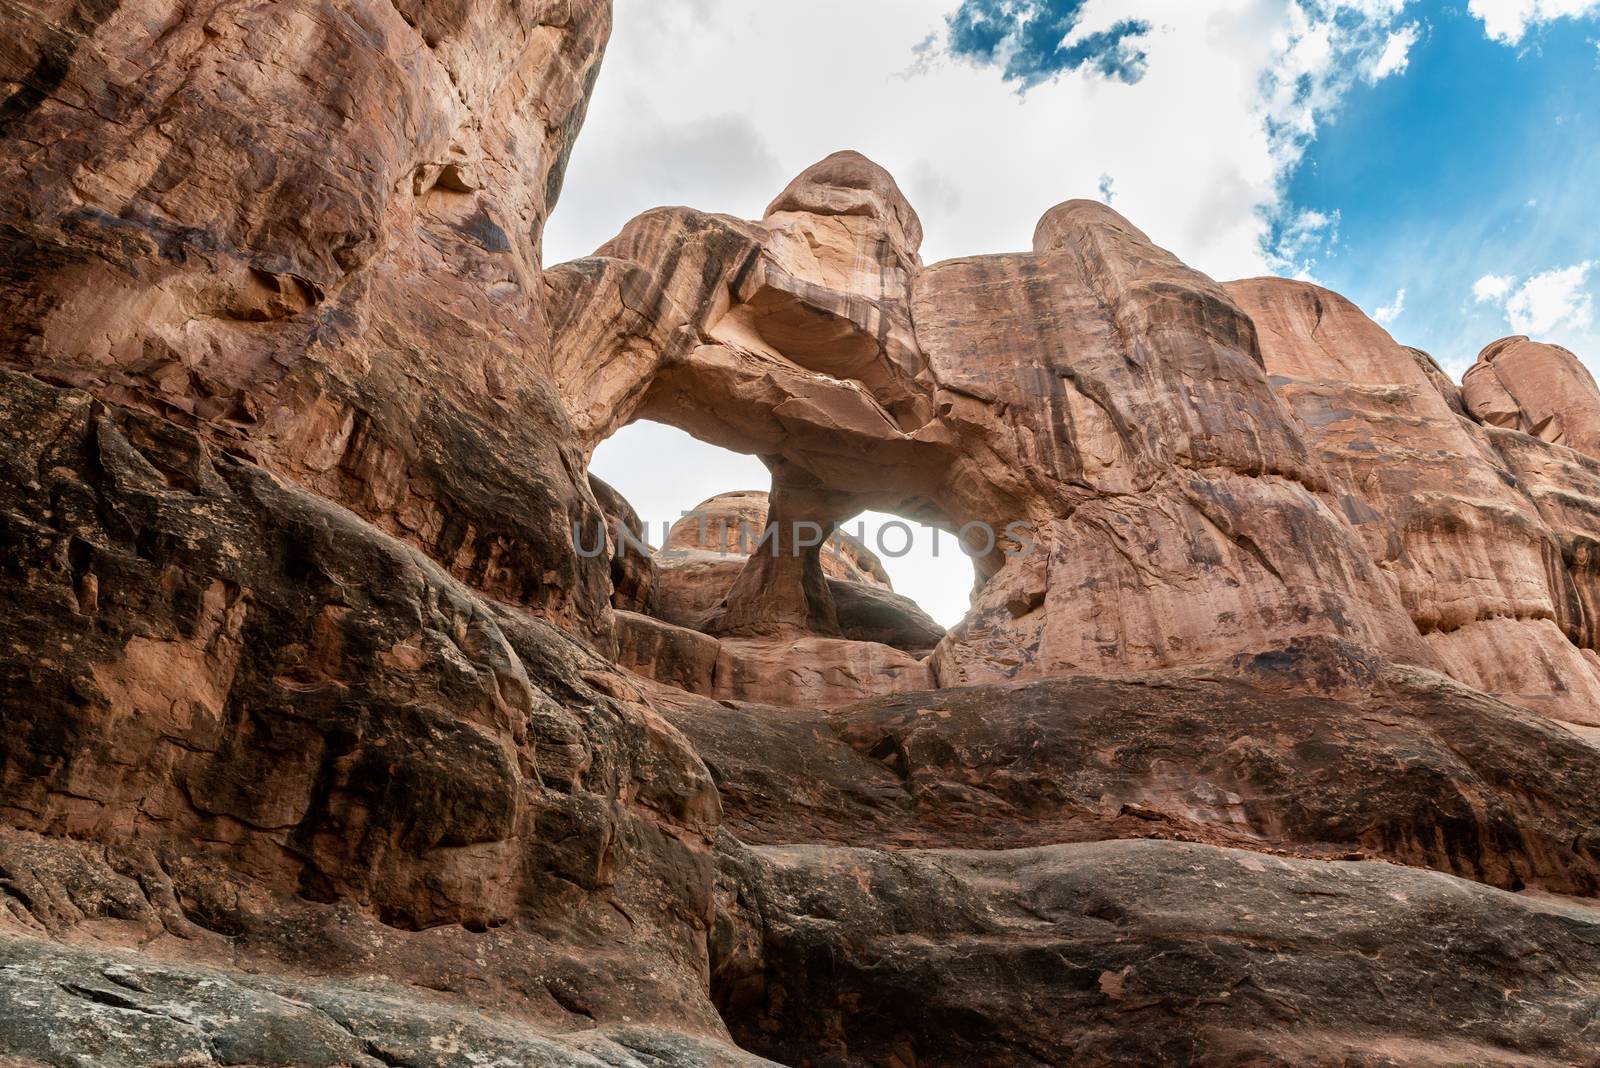 Skull Arch in Fiery Furnace in Arches National Park, Utah